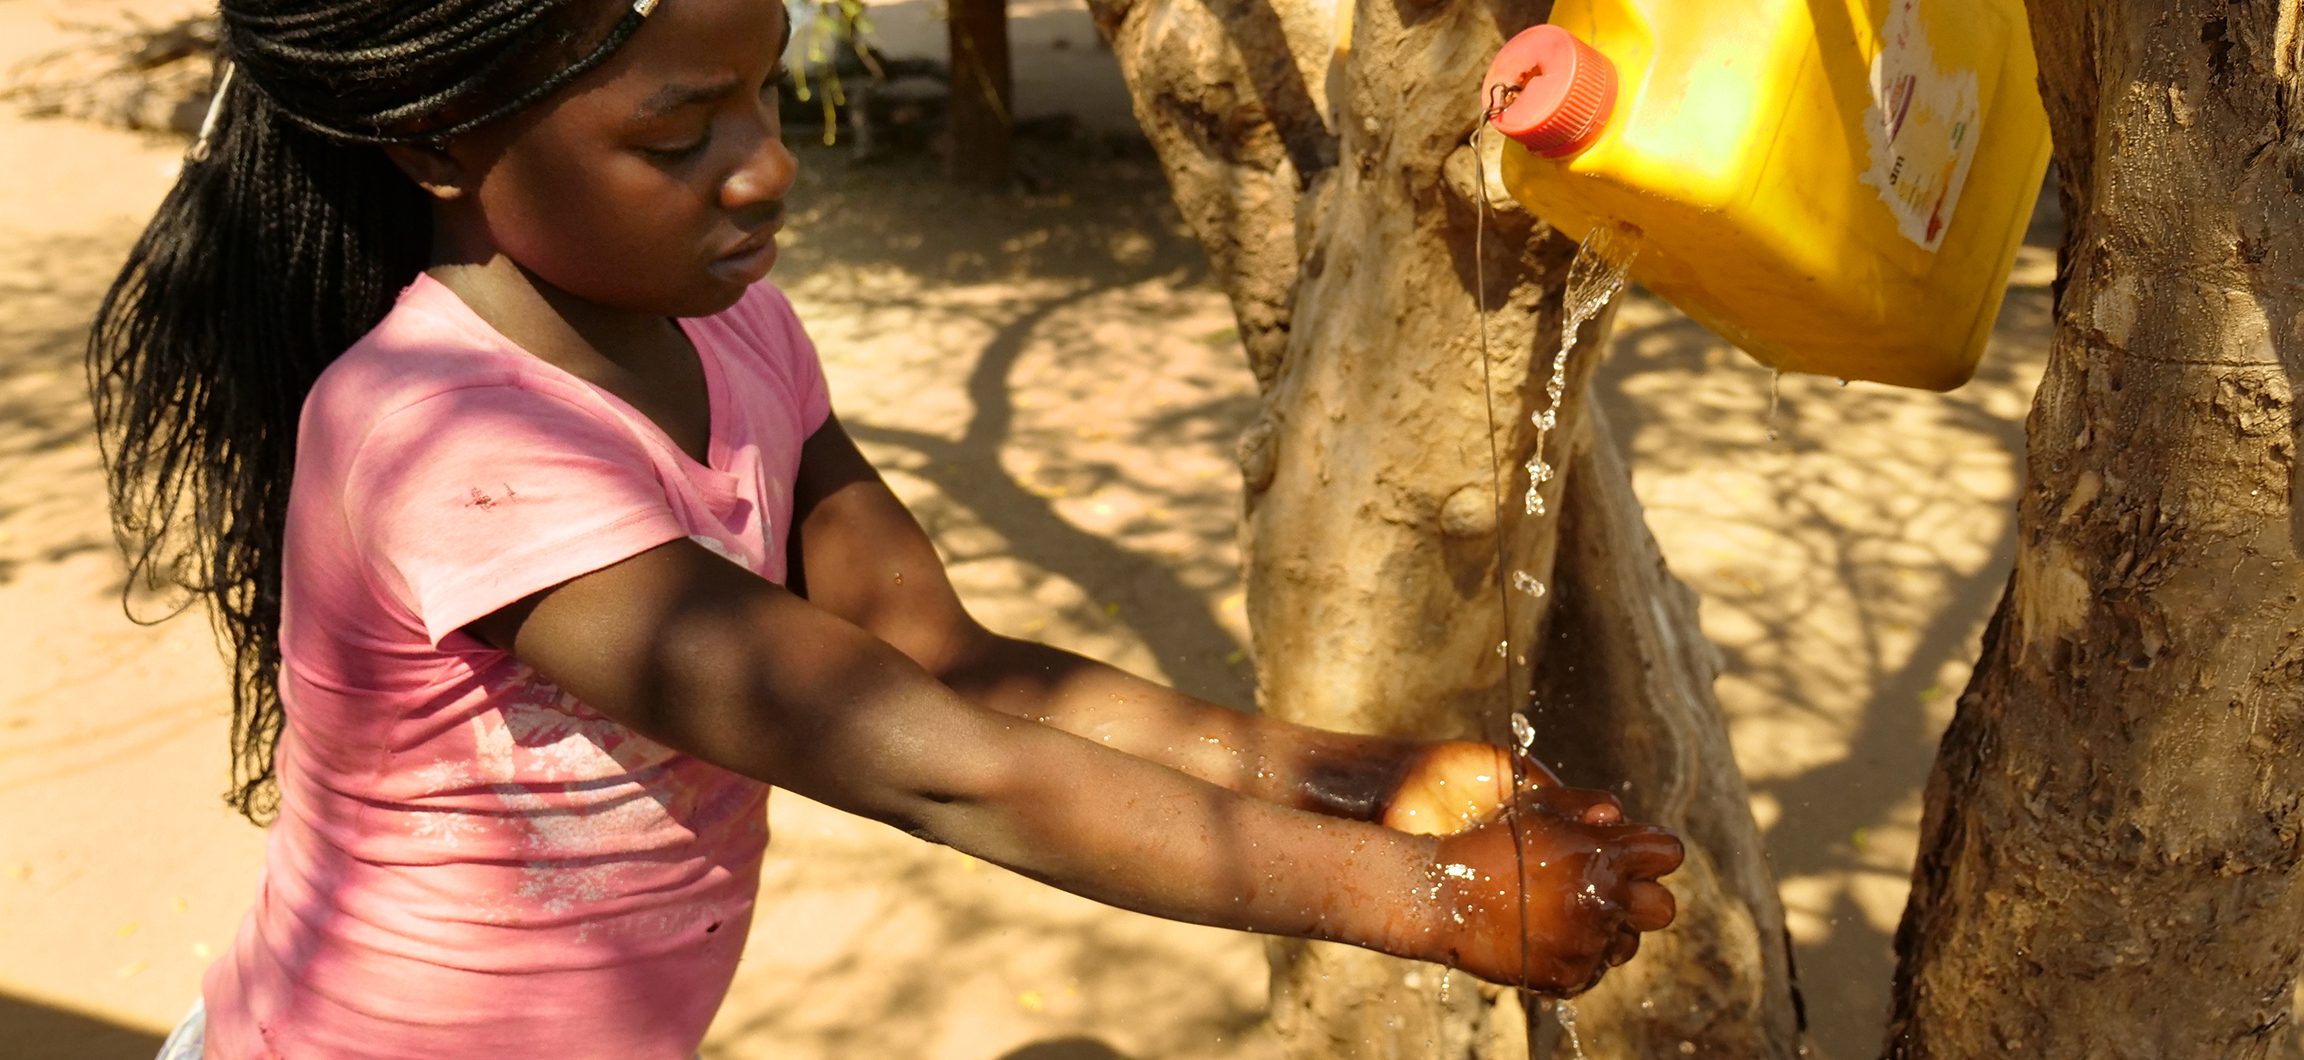 A young girl uses a hands-free device to pour water for washing her hands.